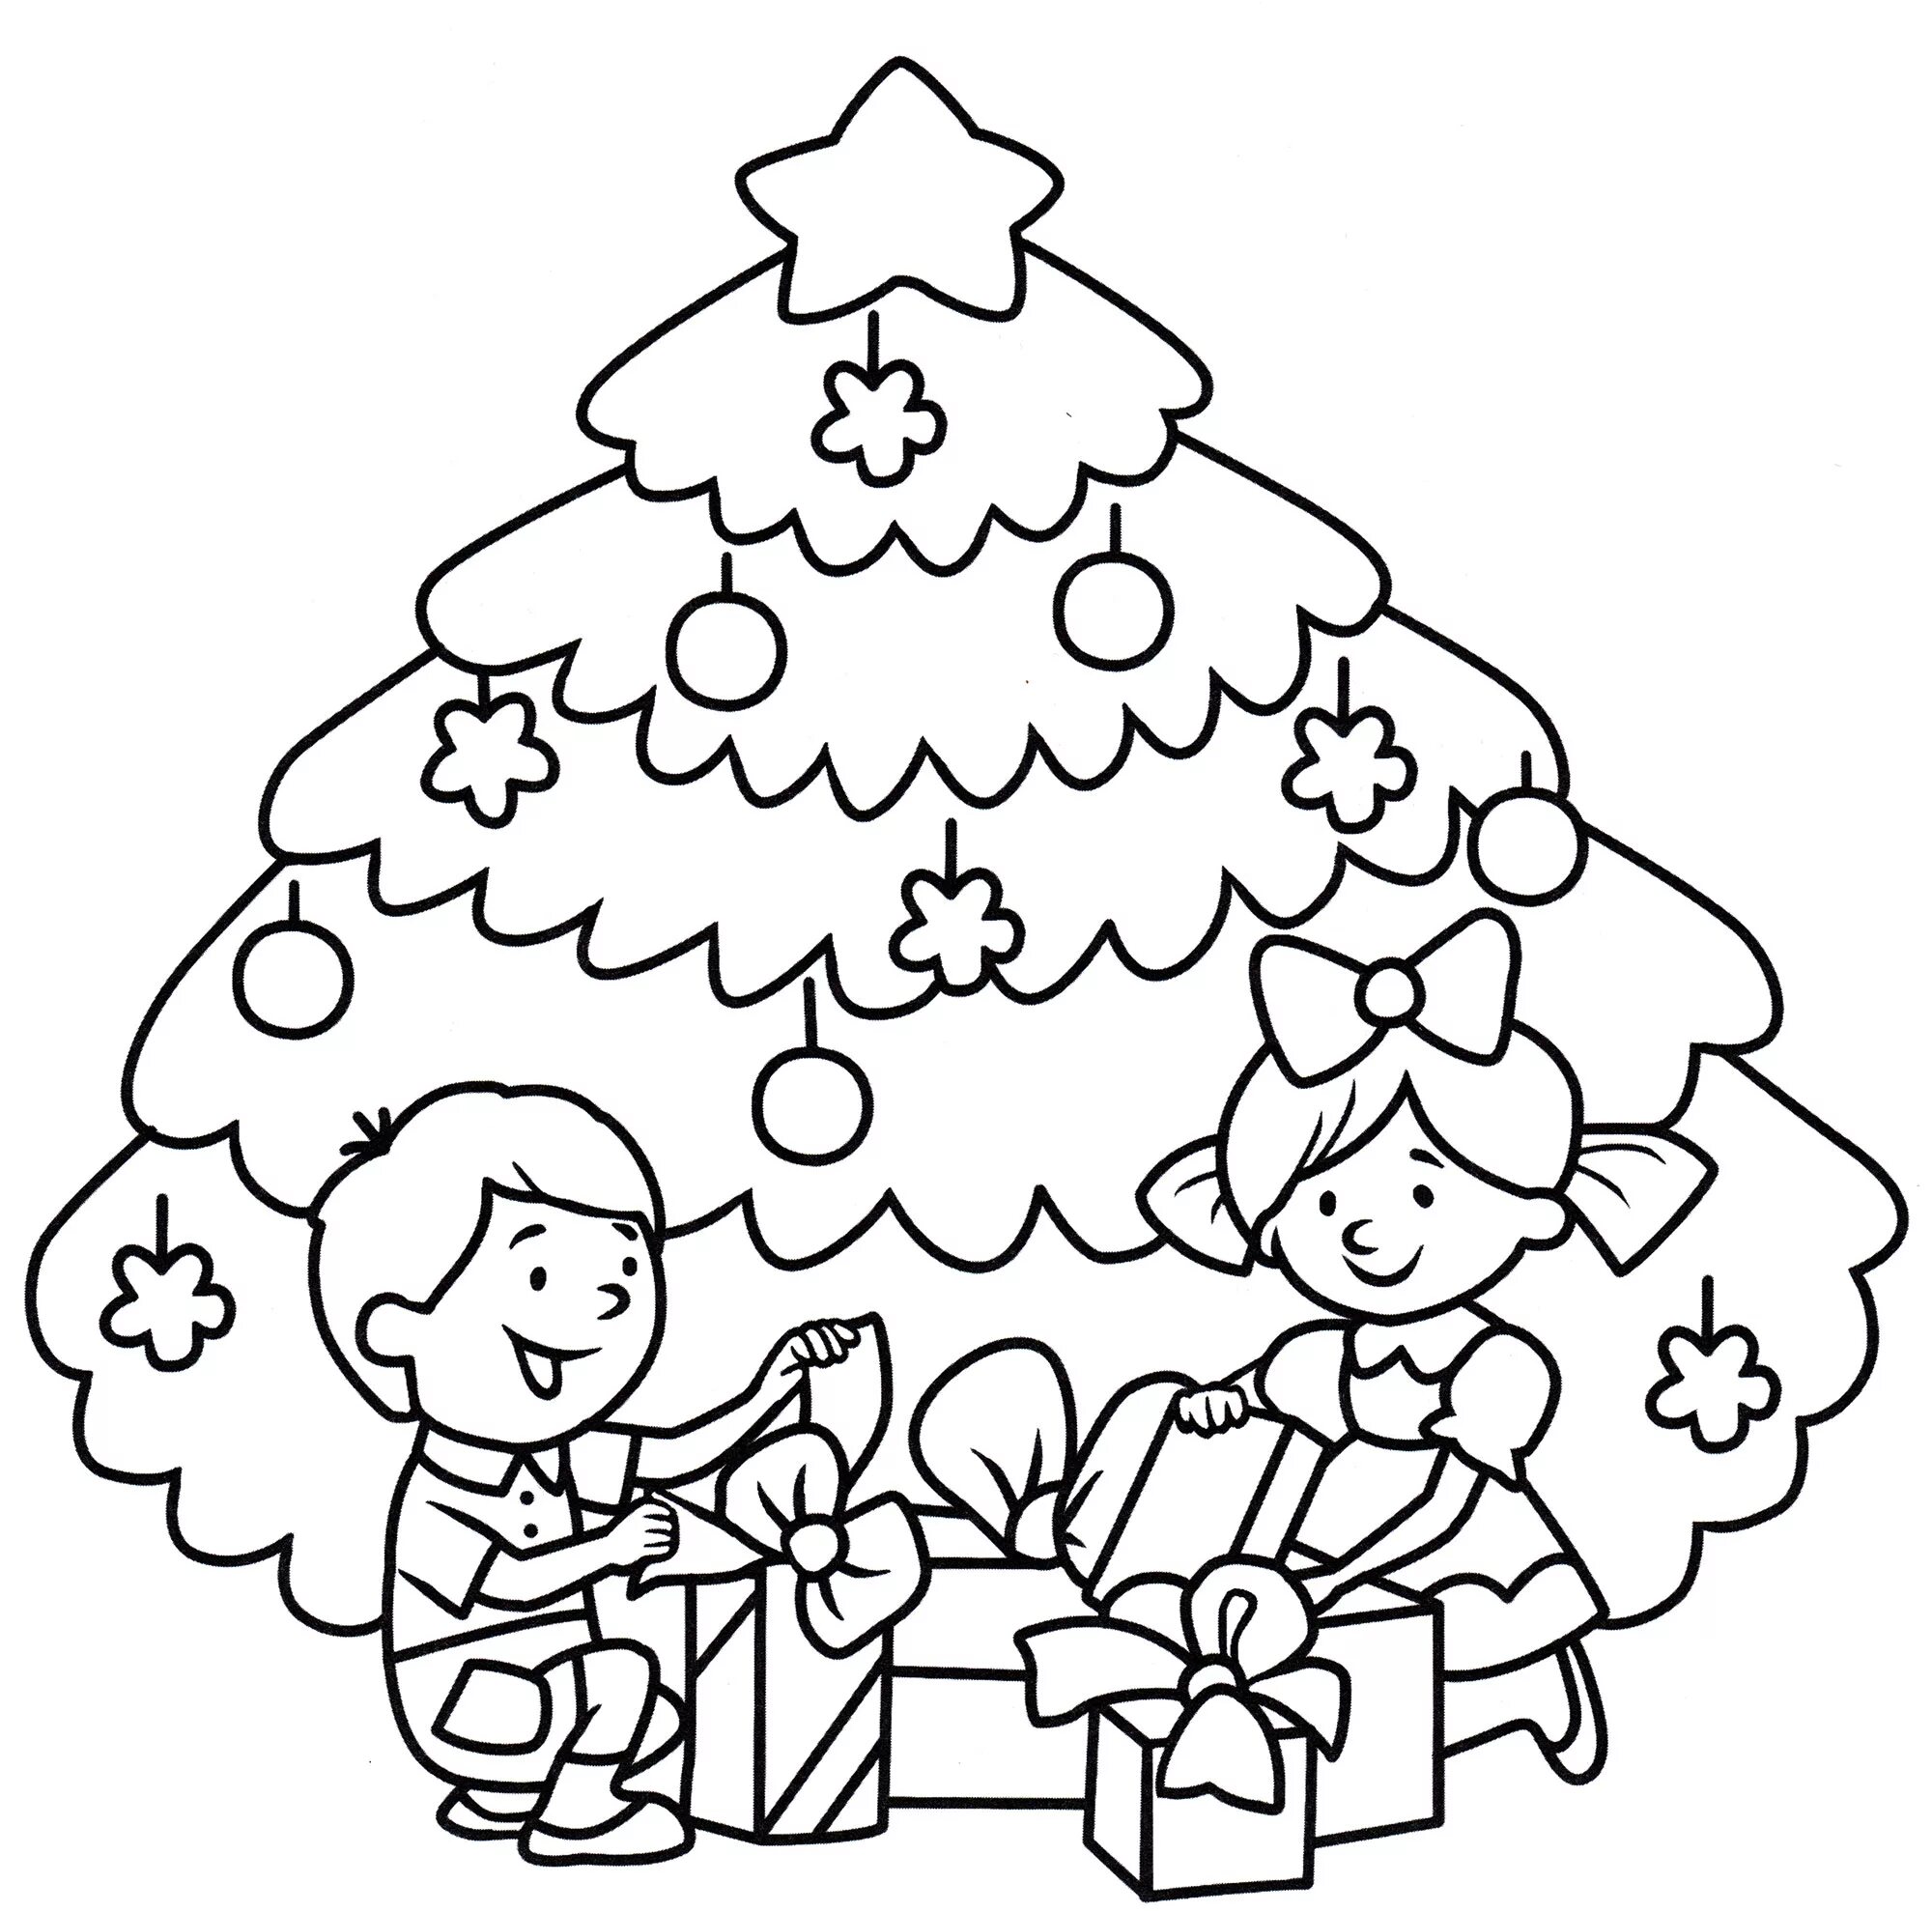 Bright Christmas coloring pages for kids